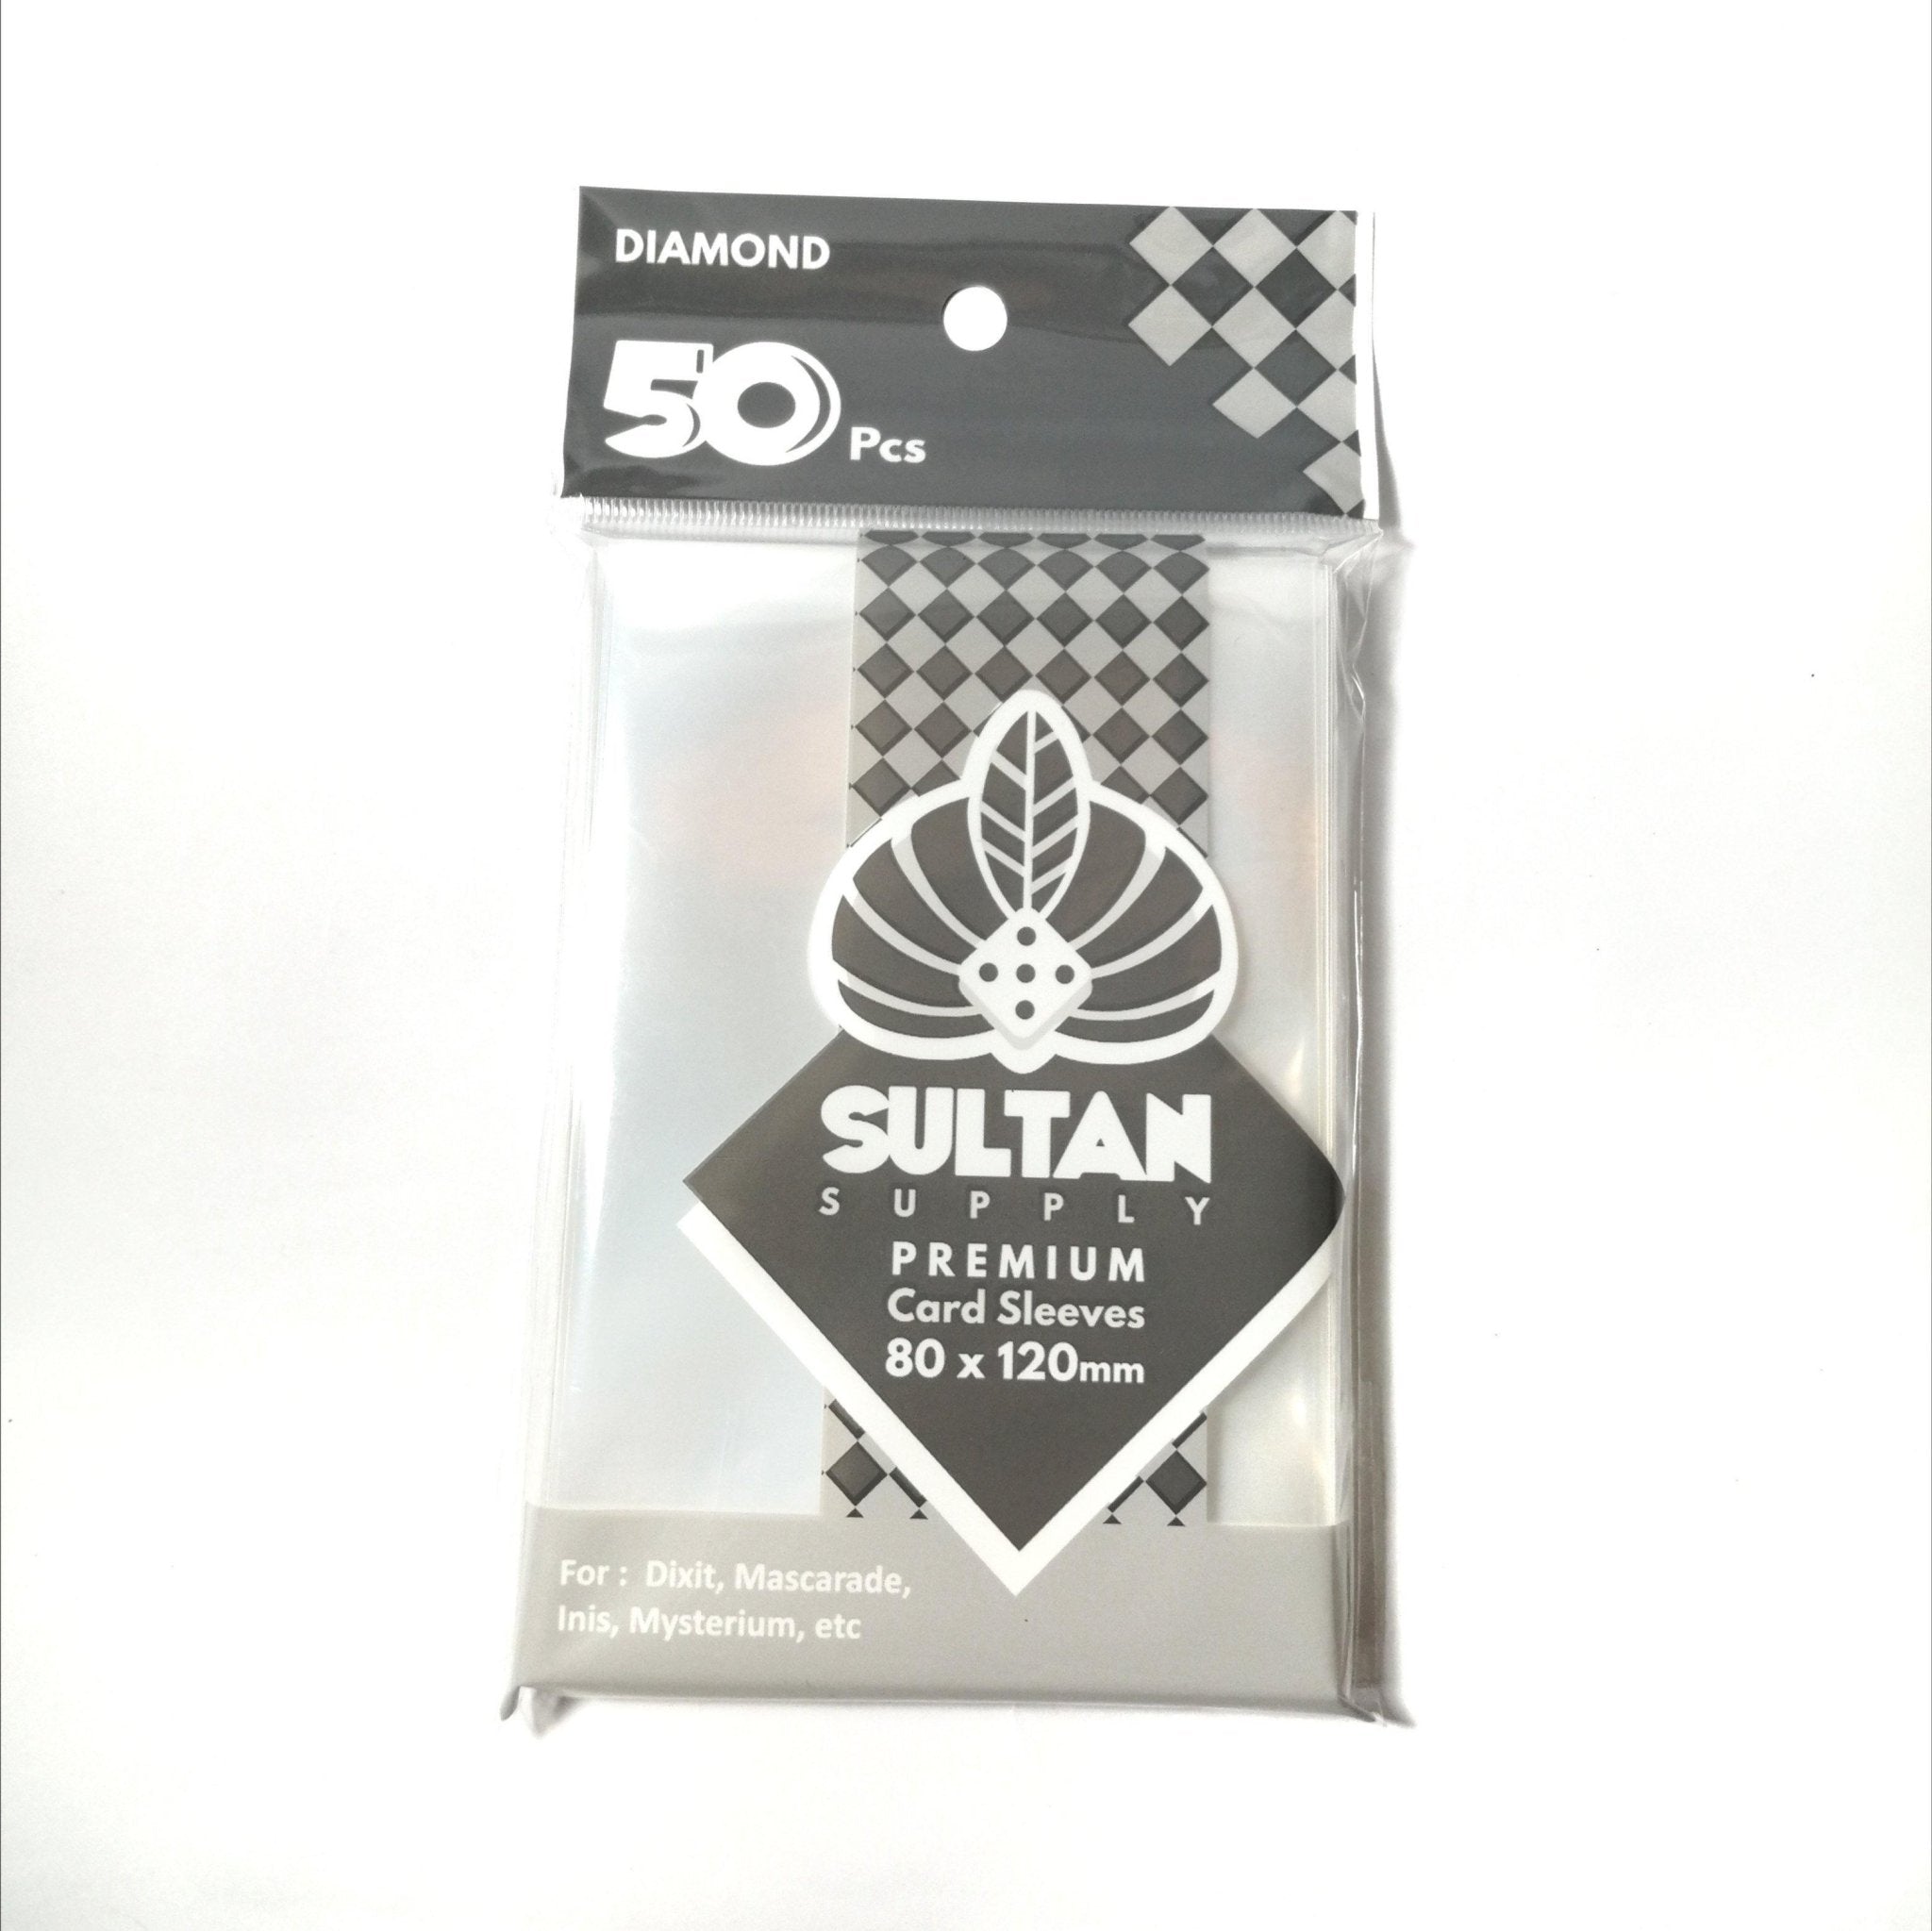 Sultan Supply Premium Card Sleeves: 80 x 120 mm Diamond (90 microns) - Gaming Library